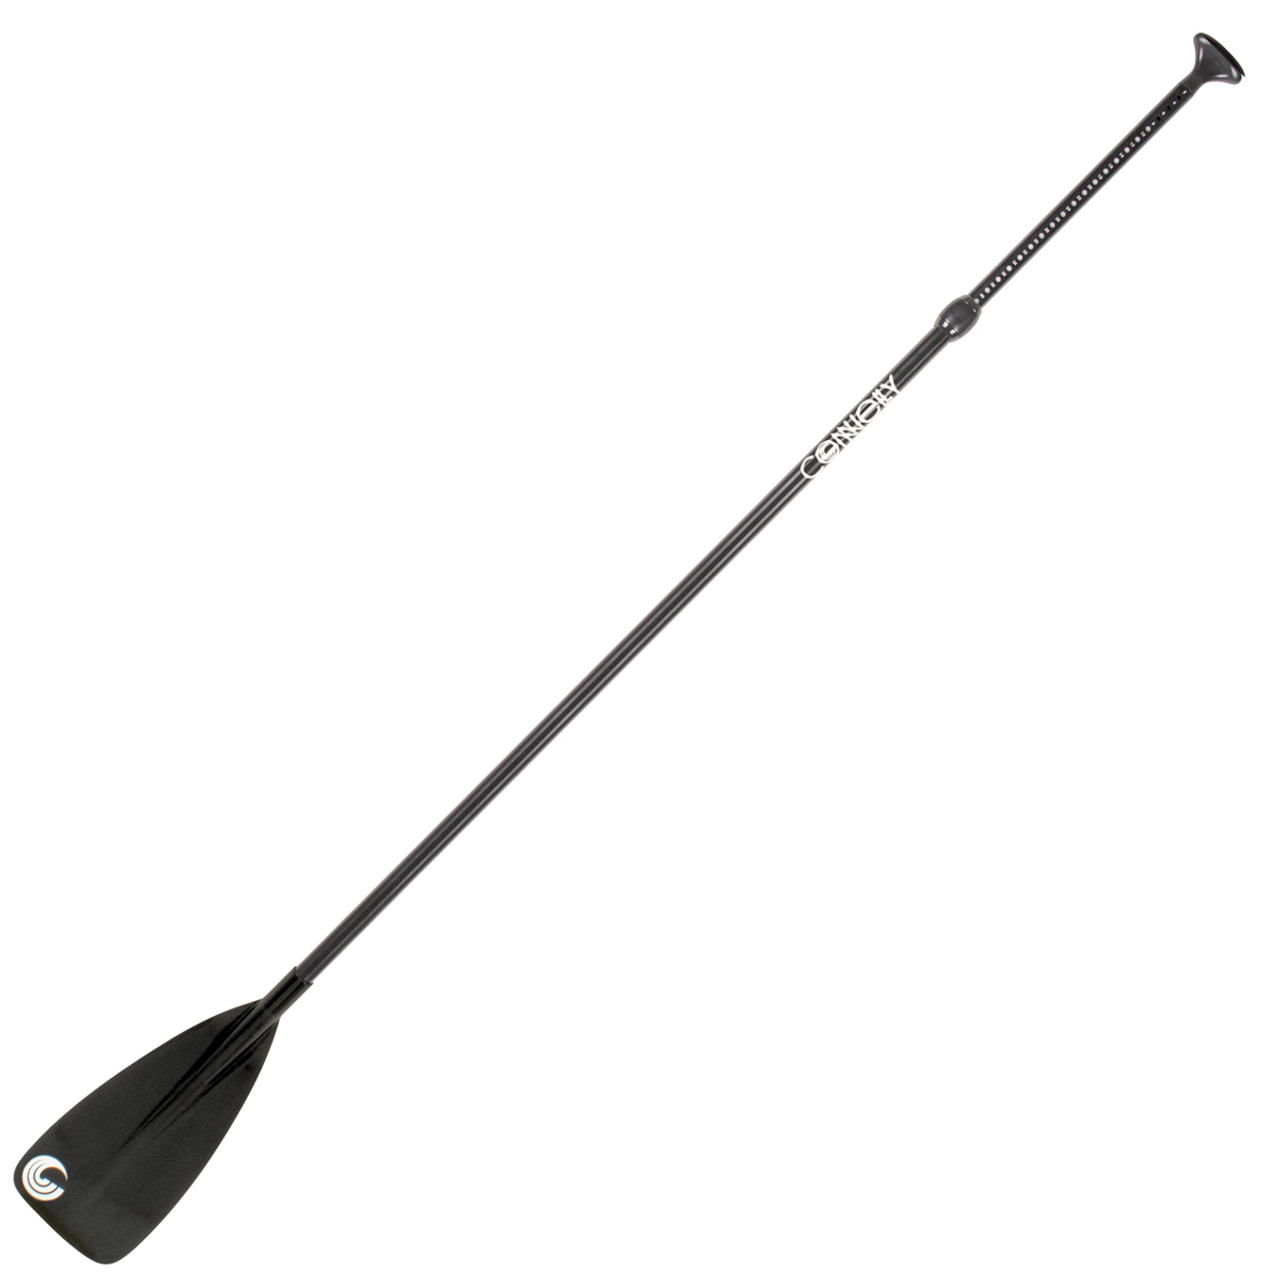 Connelly Aluminum Adjustable Paddle